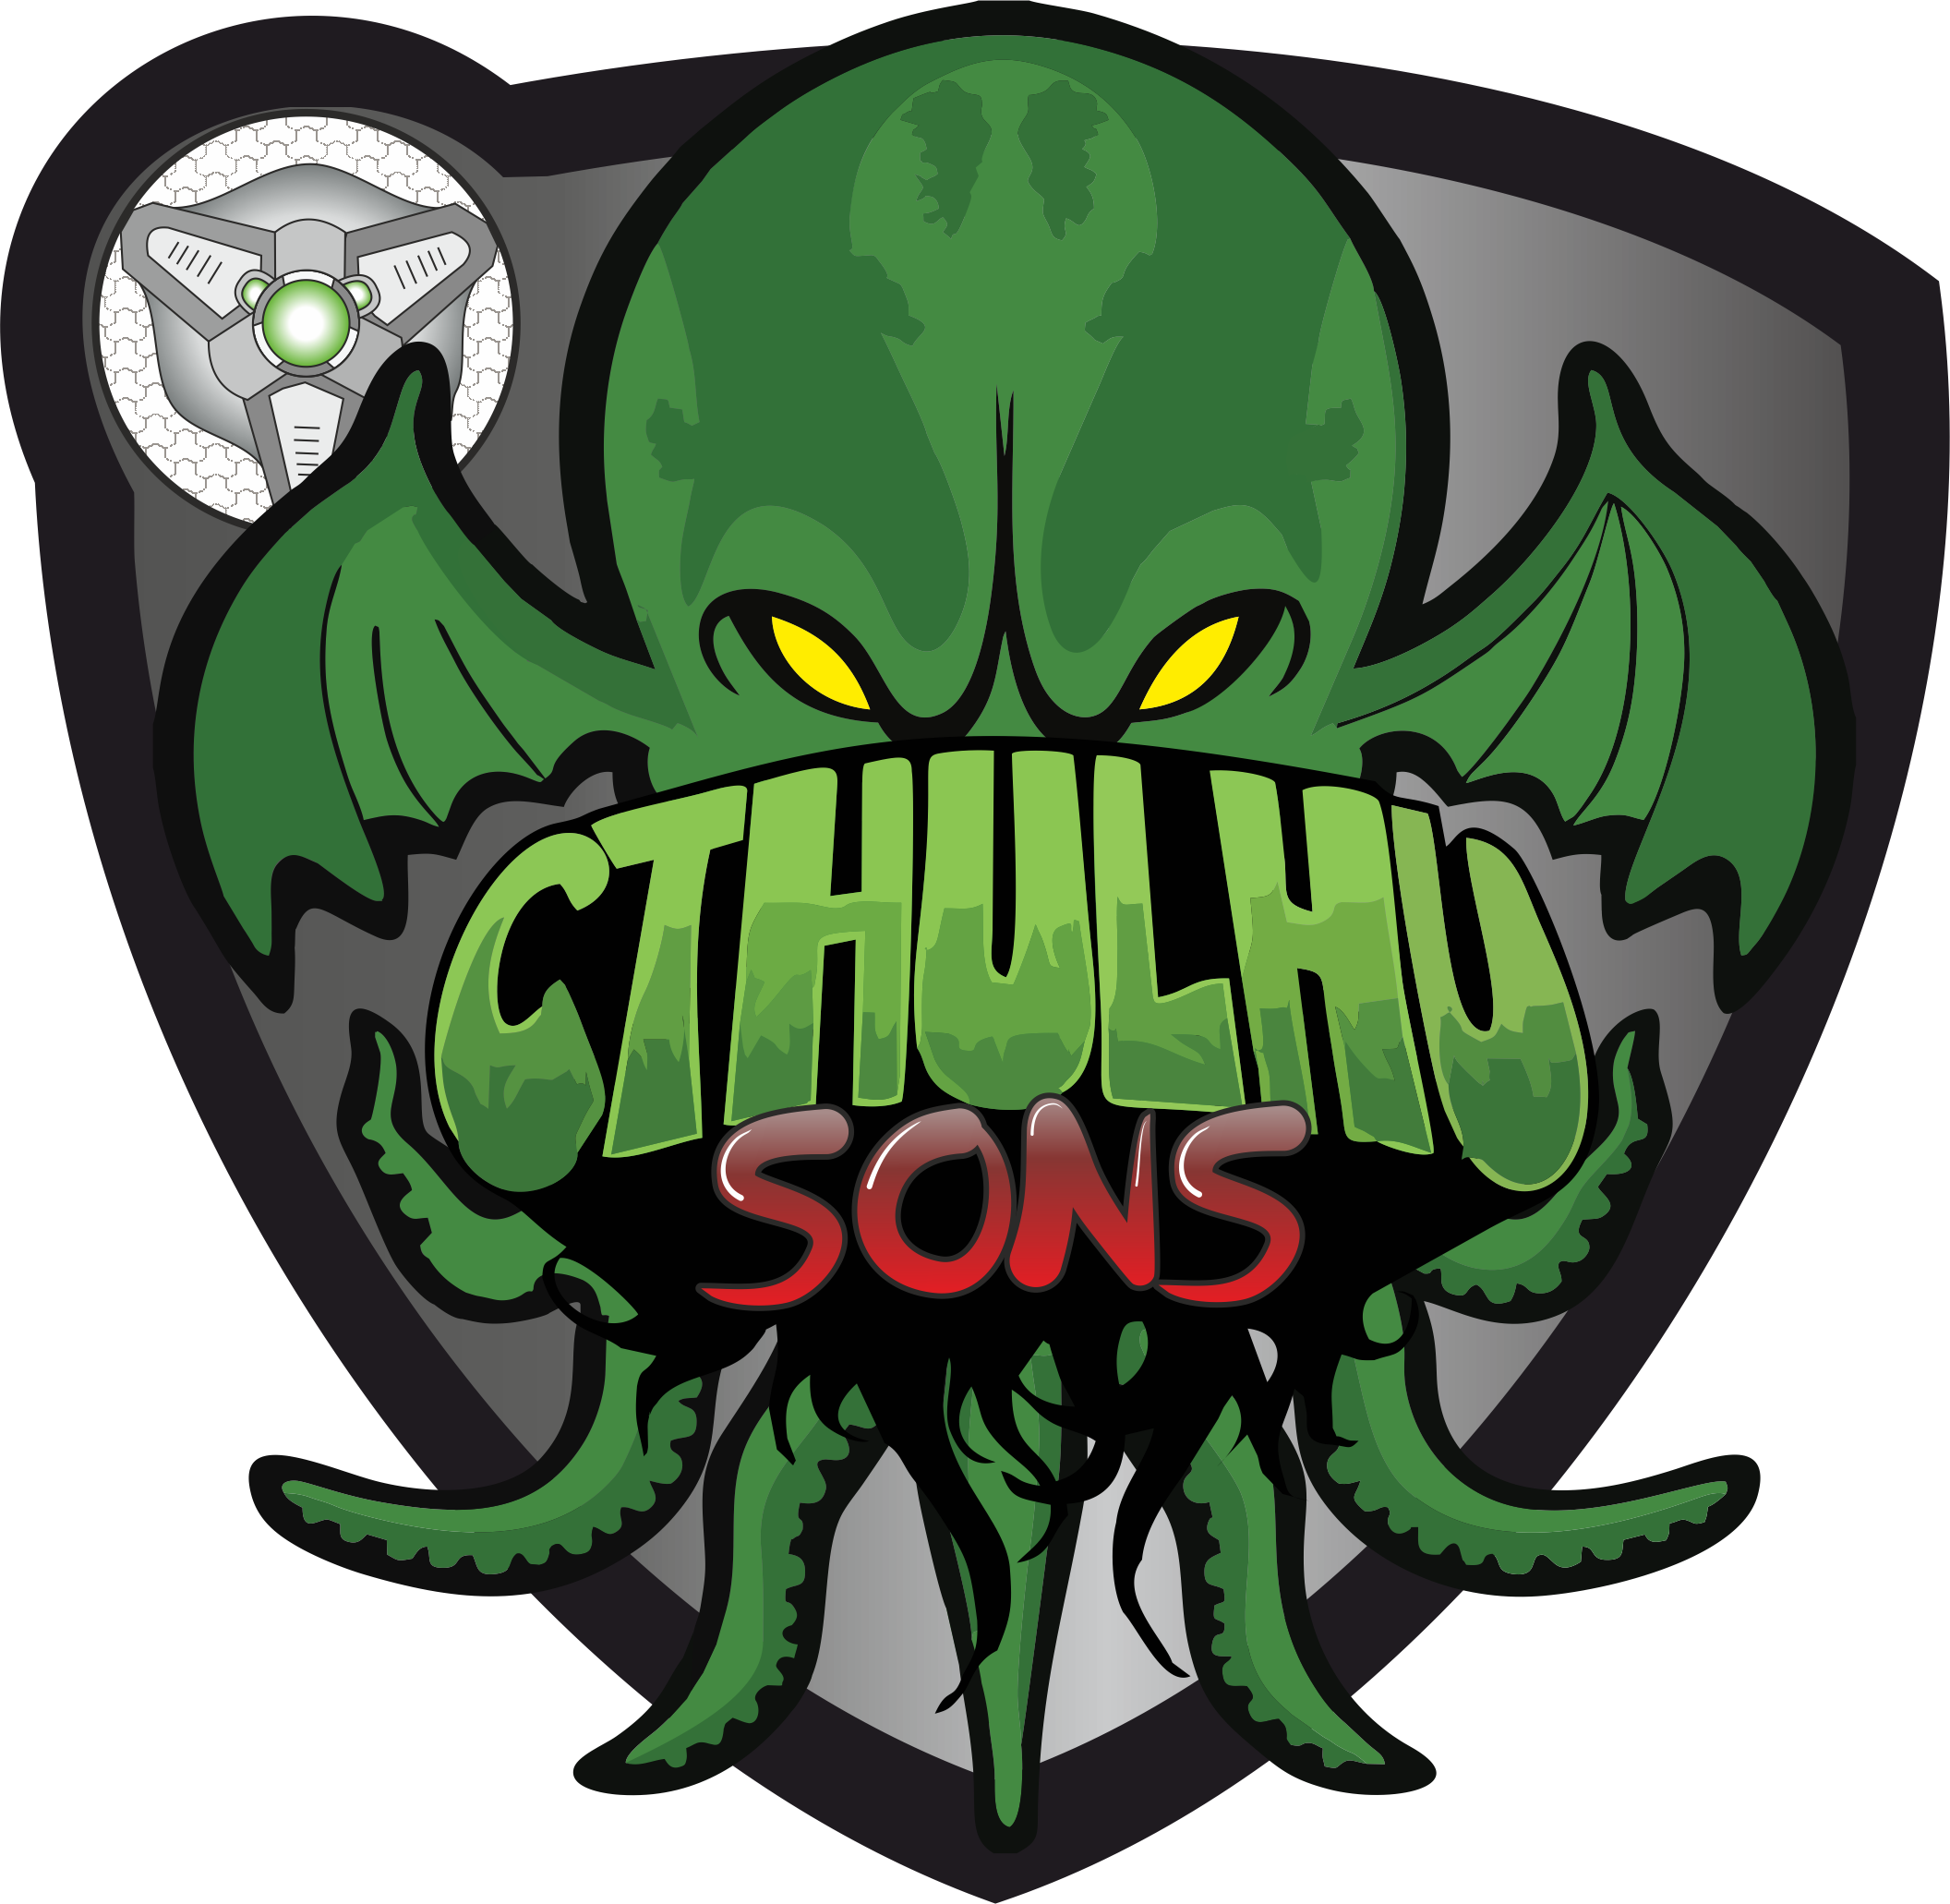 Cthulhu Sons - Tasty Minstrel Games Cthulhu Realms Board Game (2112x2062)